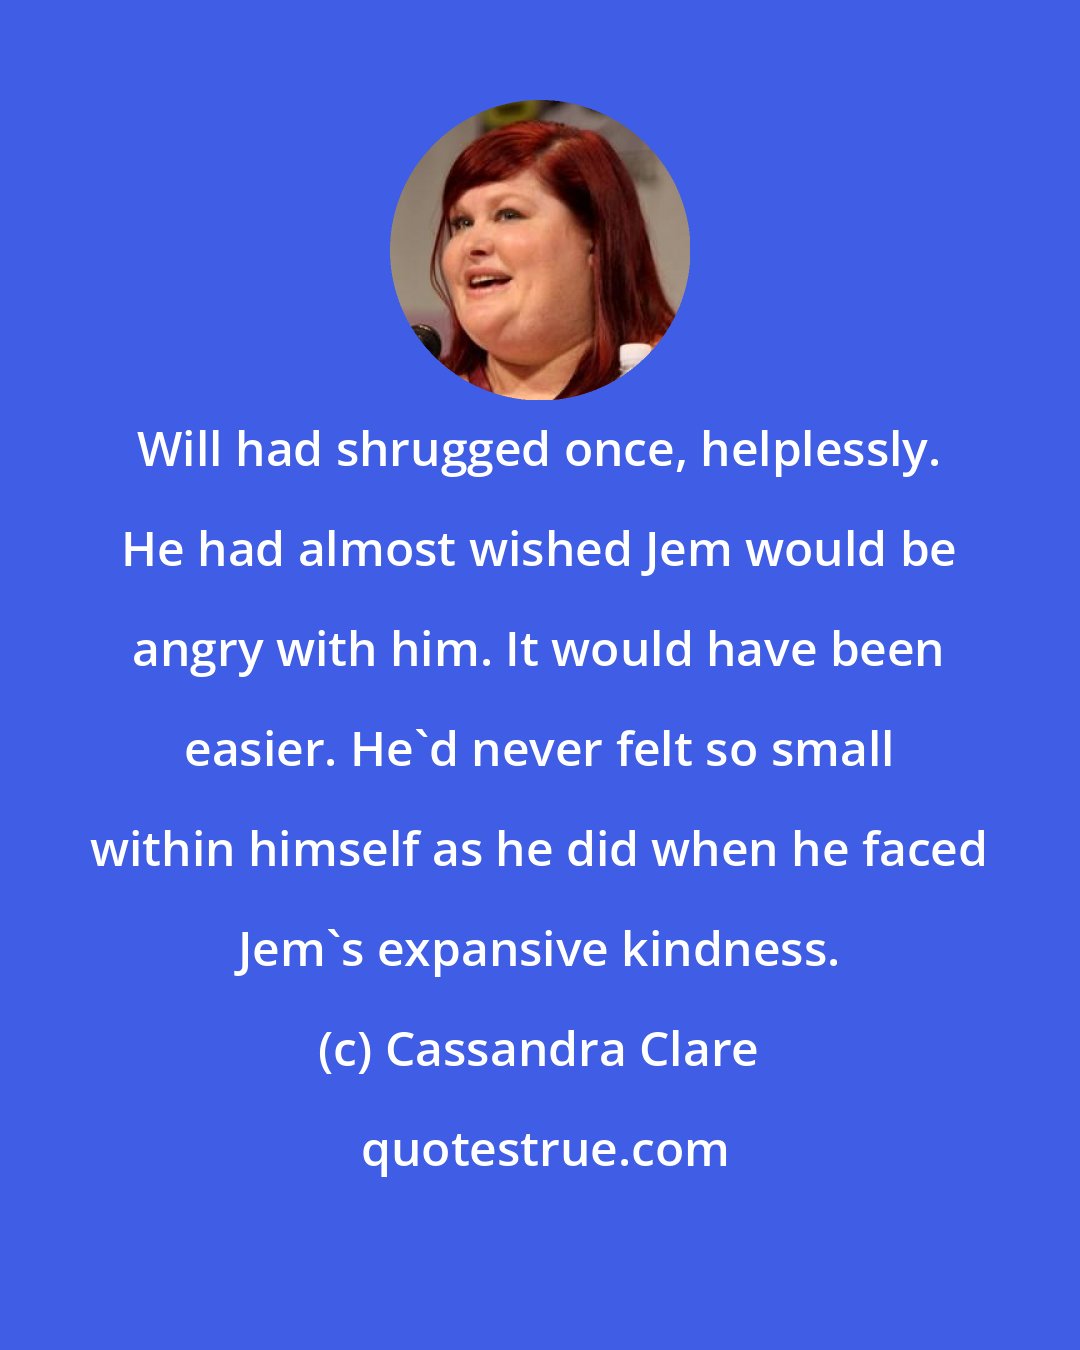 Cassandra Clare: Will had shrugged once, helplessly. He had almost wished Jem would be angry with him. It would have been easier. He'd never felt so small within himself as he did when he faced Jem's expansive kindness.